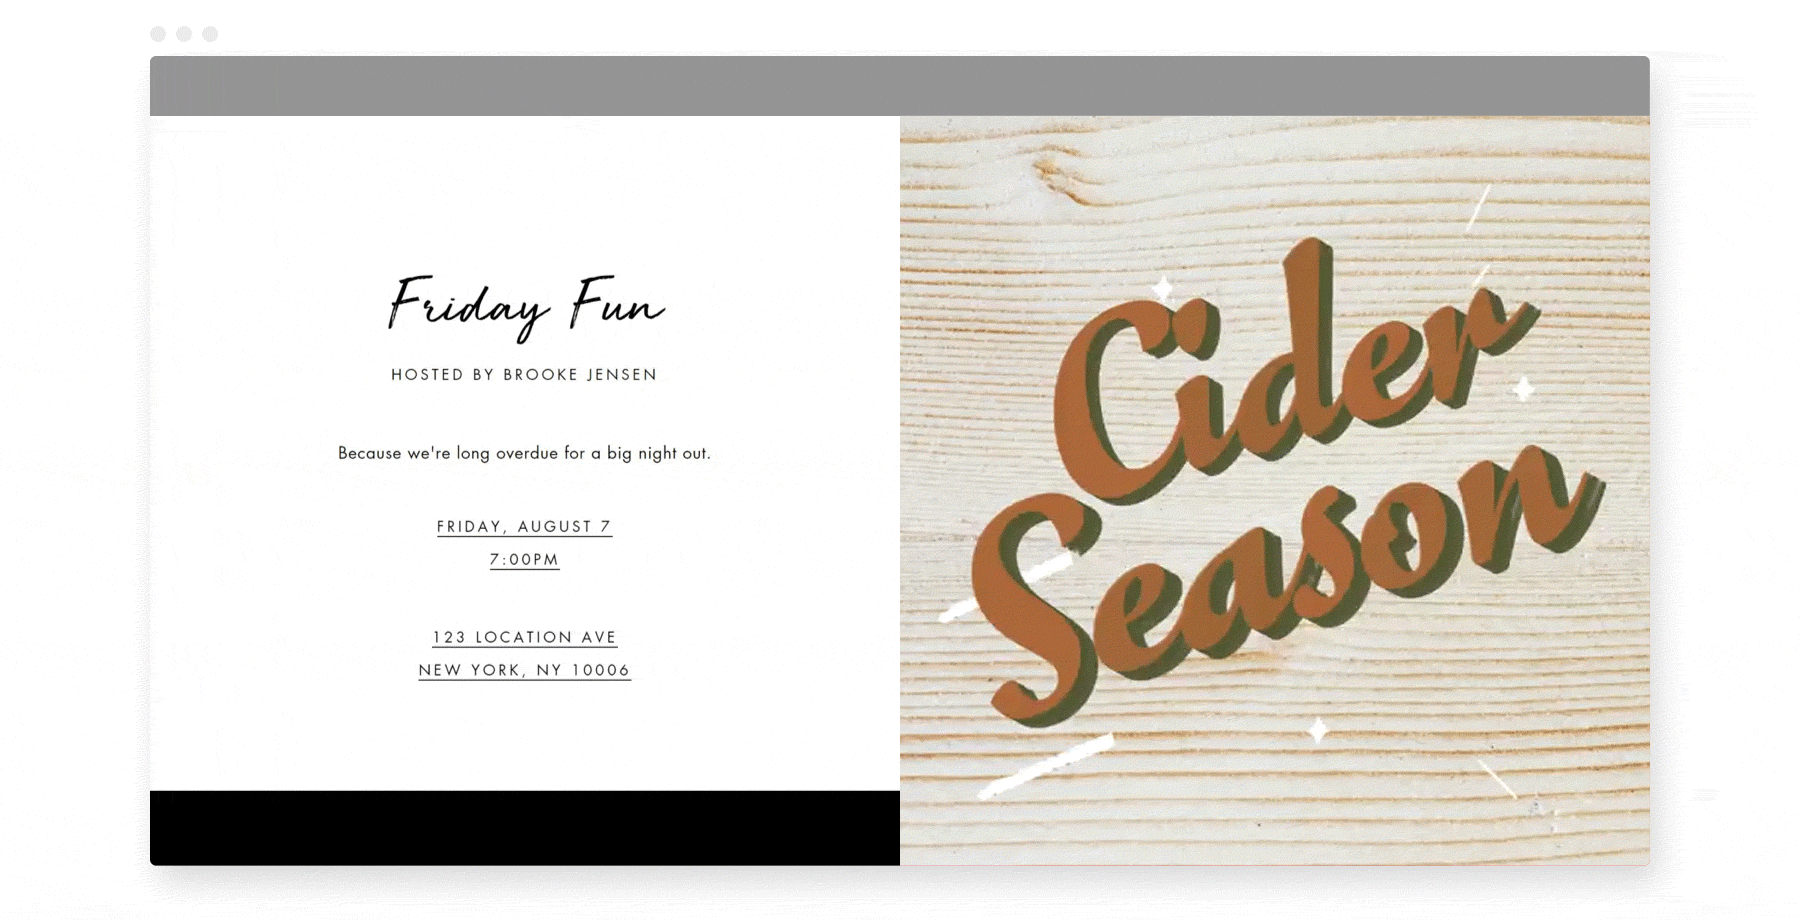 An online invitation with a gif that reads “Cider season.”